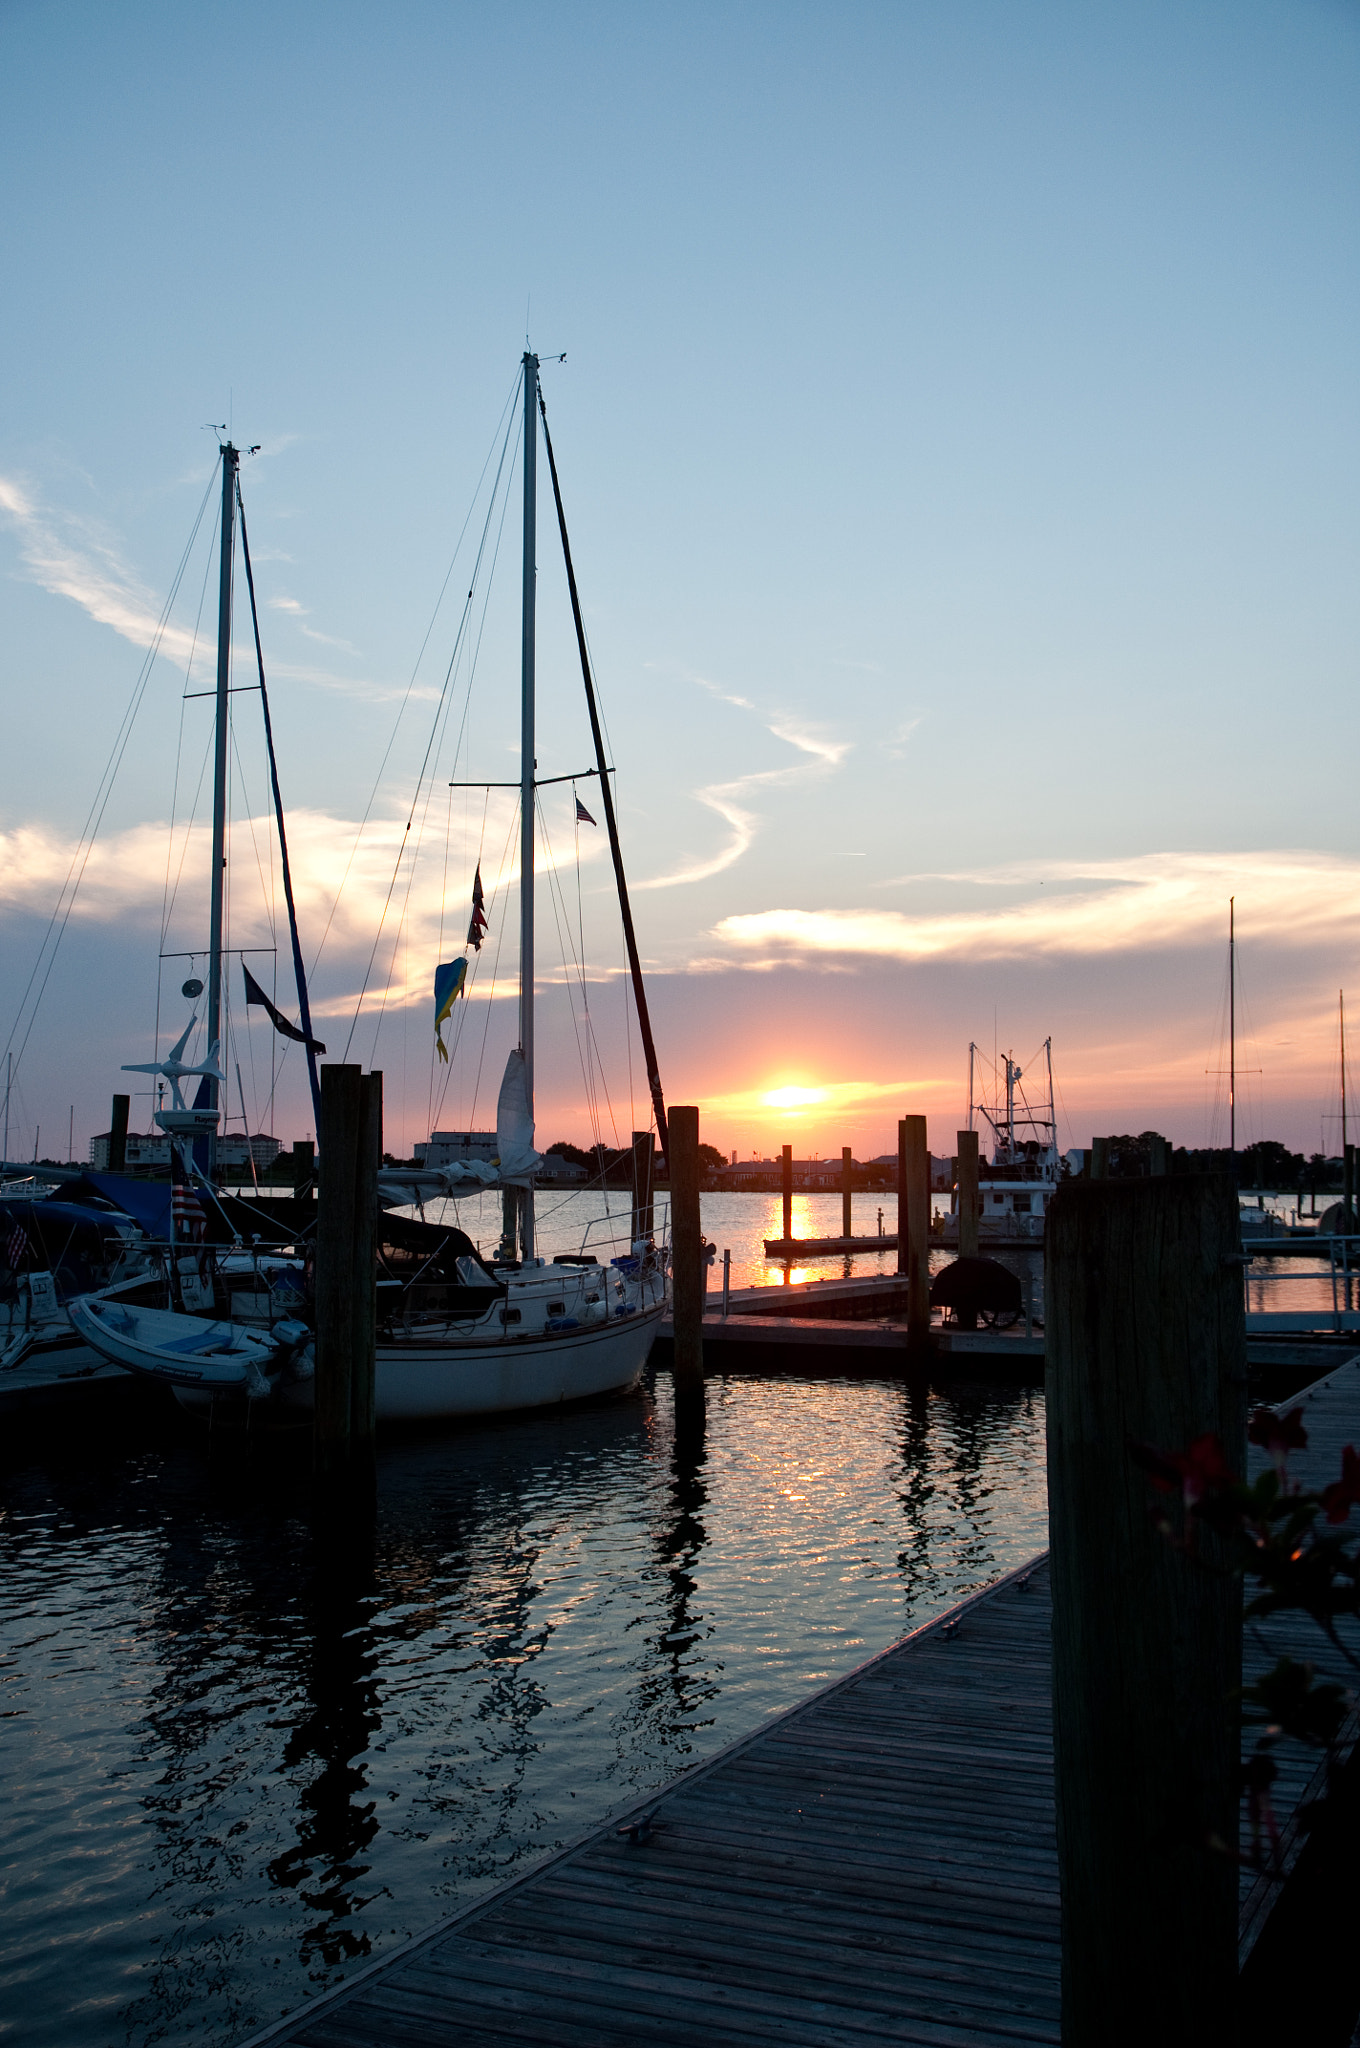 Nikon D90 + Tamron SP AF 17-50mm F2.8 XR Di II VC LD Aspherical (IF) sample photo. Sunset downtown beaufort photography